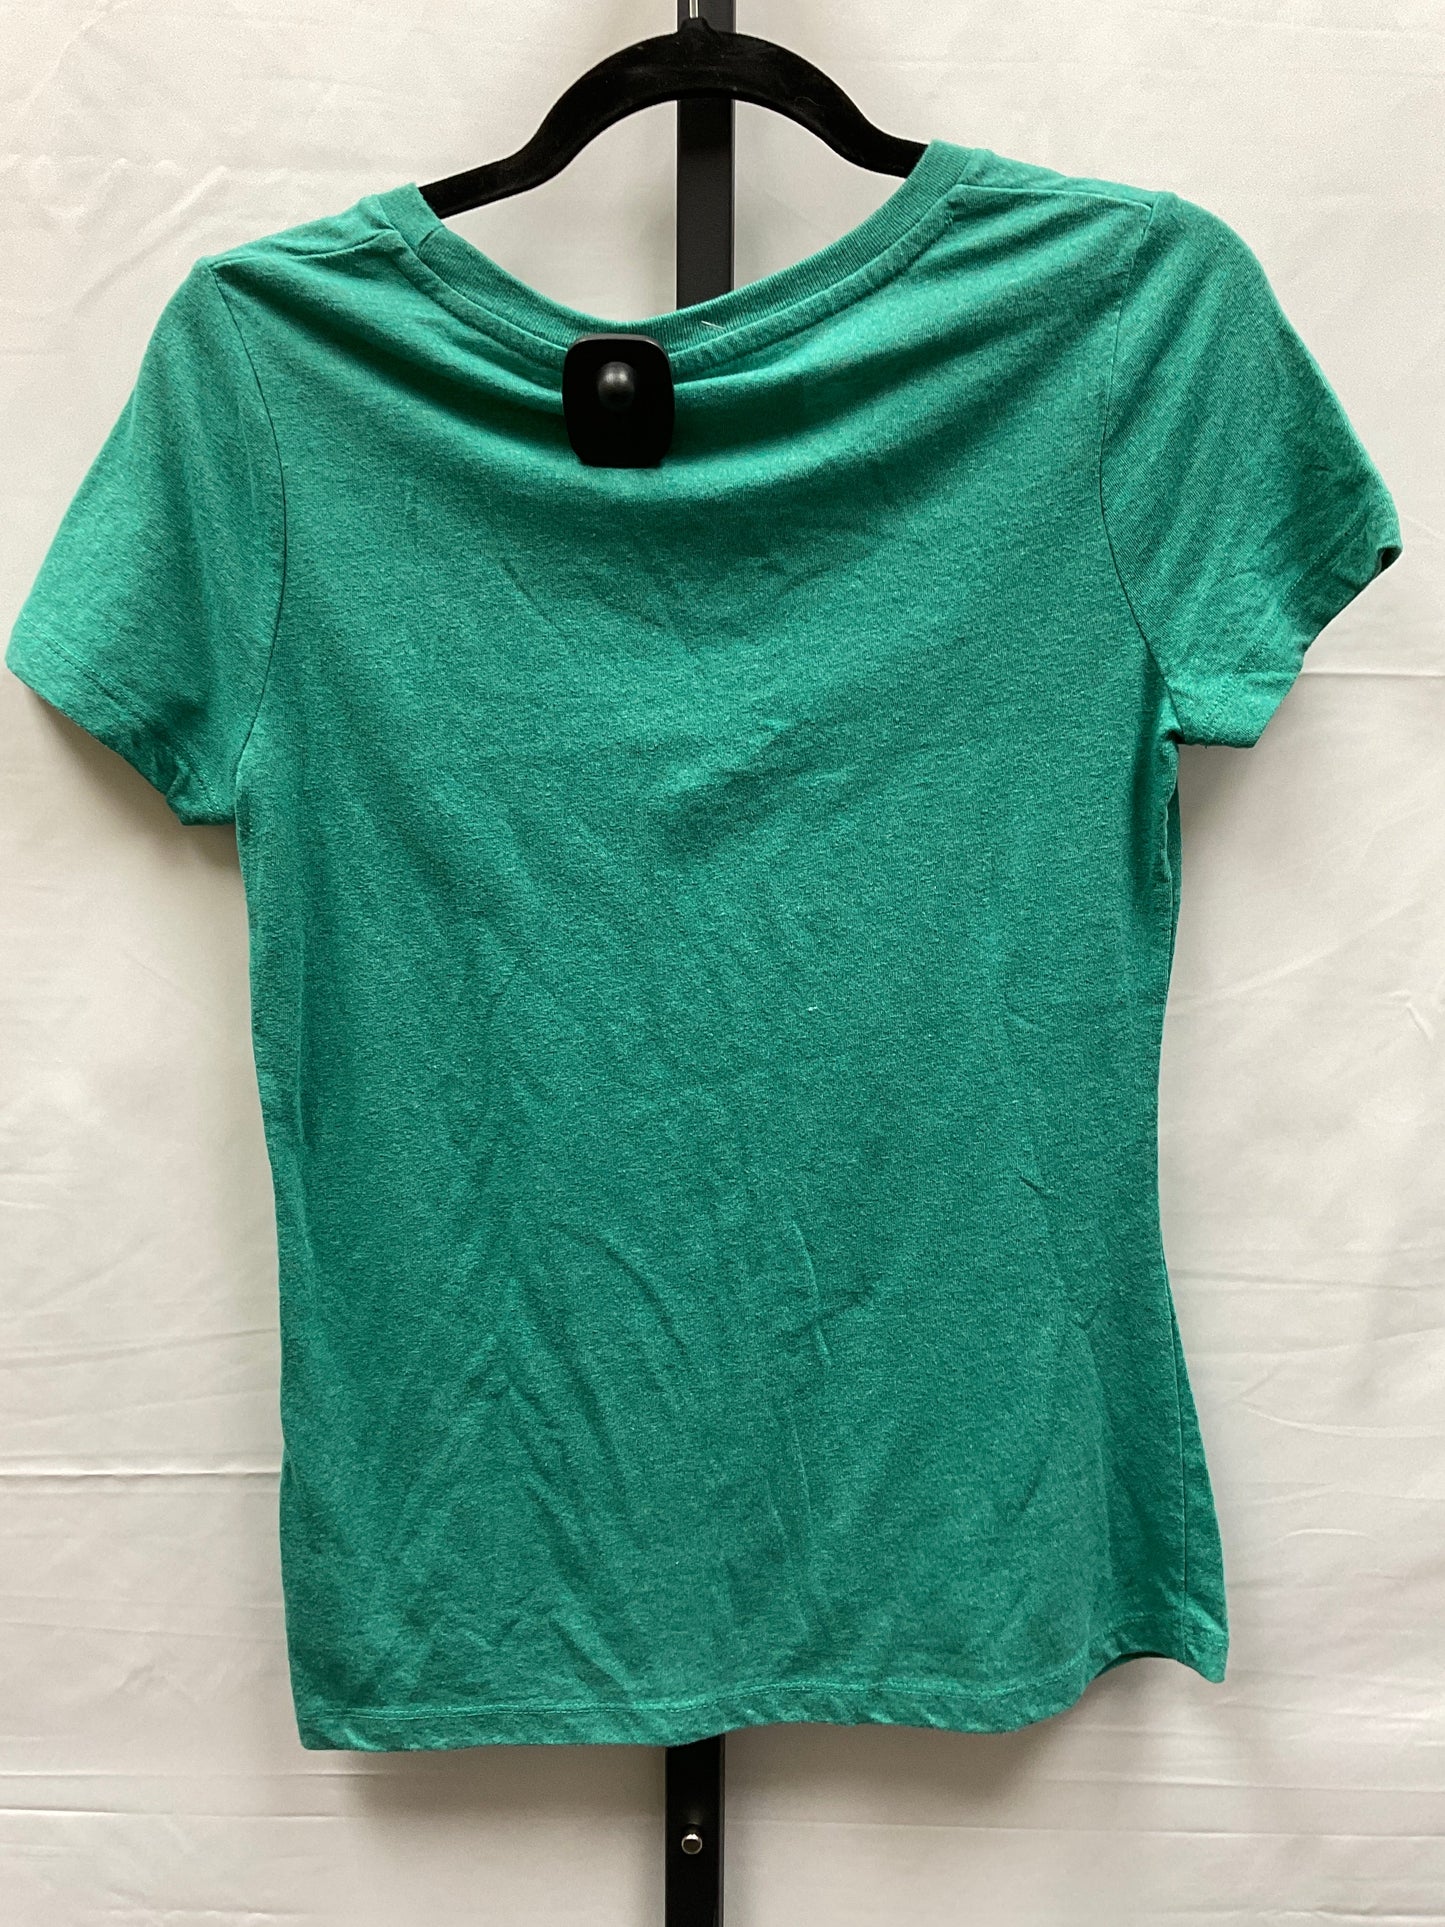 Green Top Short Sleeve Basic Mossimo, Size M